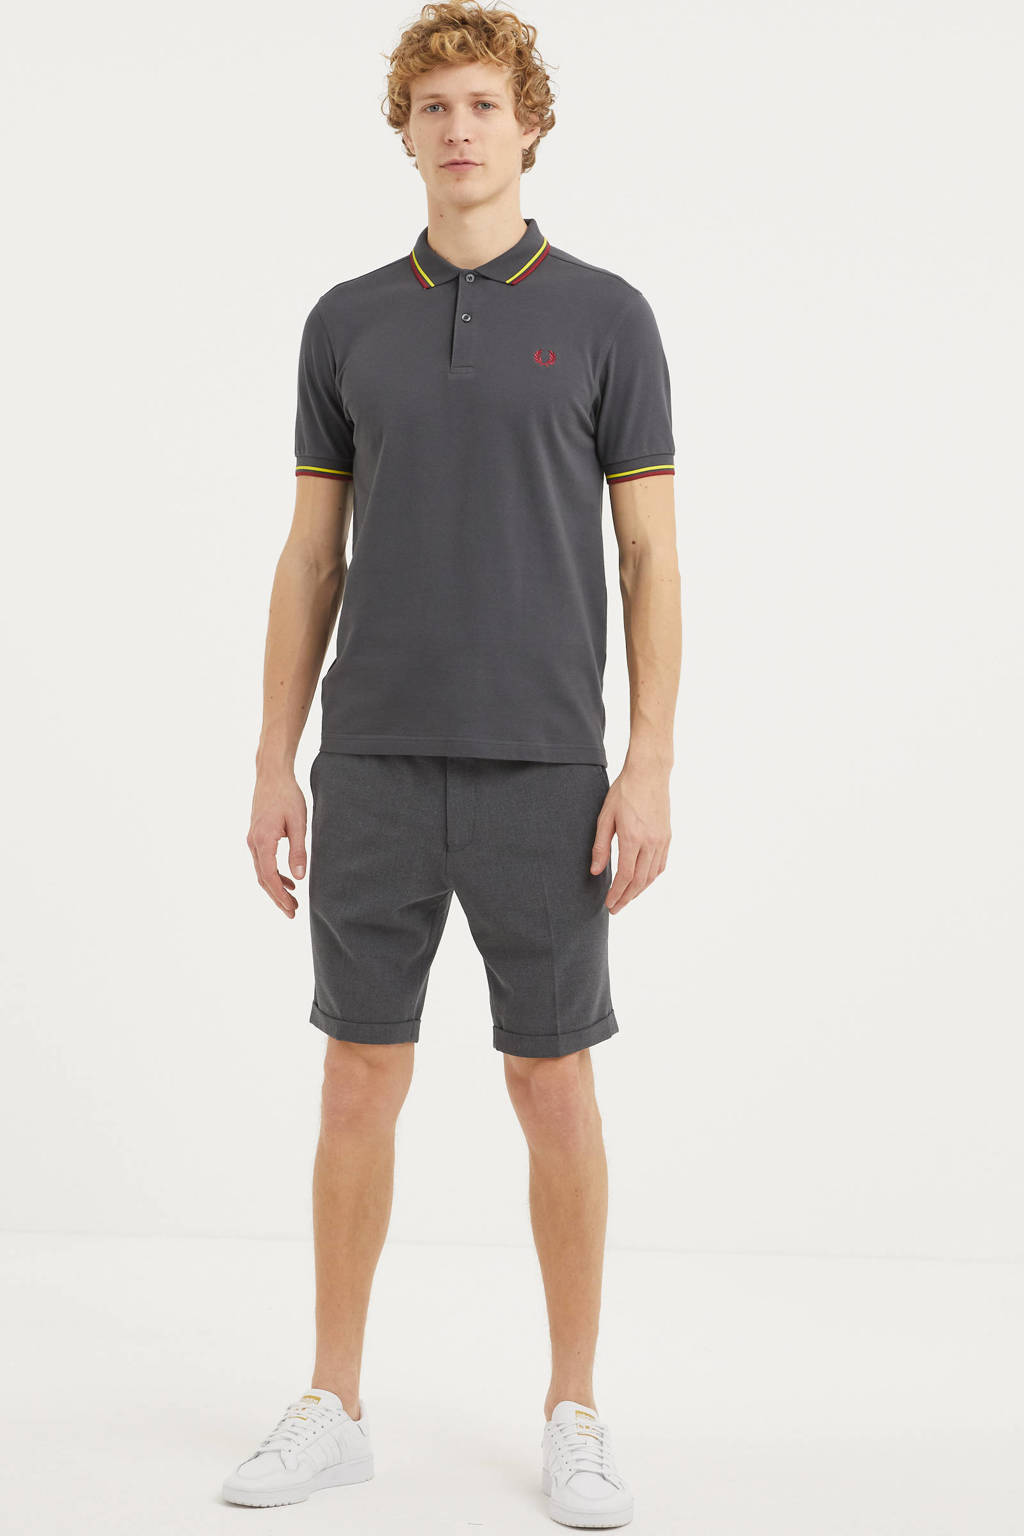 Fred Perry regular fit polo donkergrijs, Grijs/camel